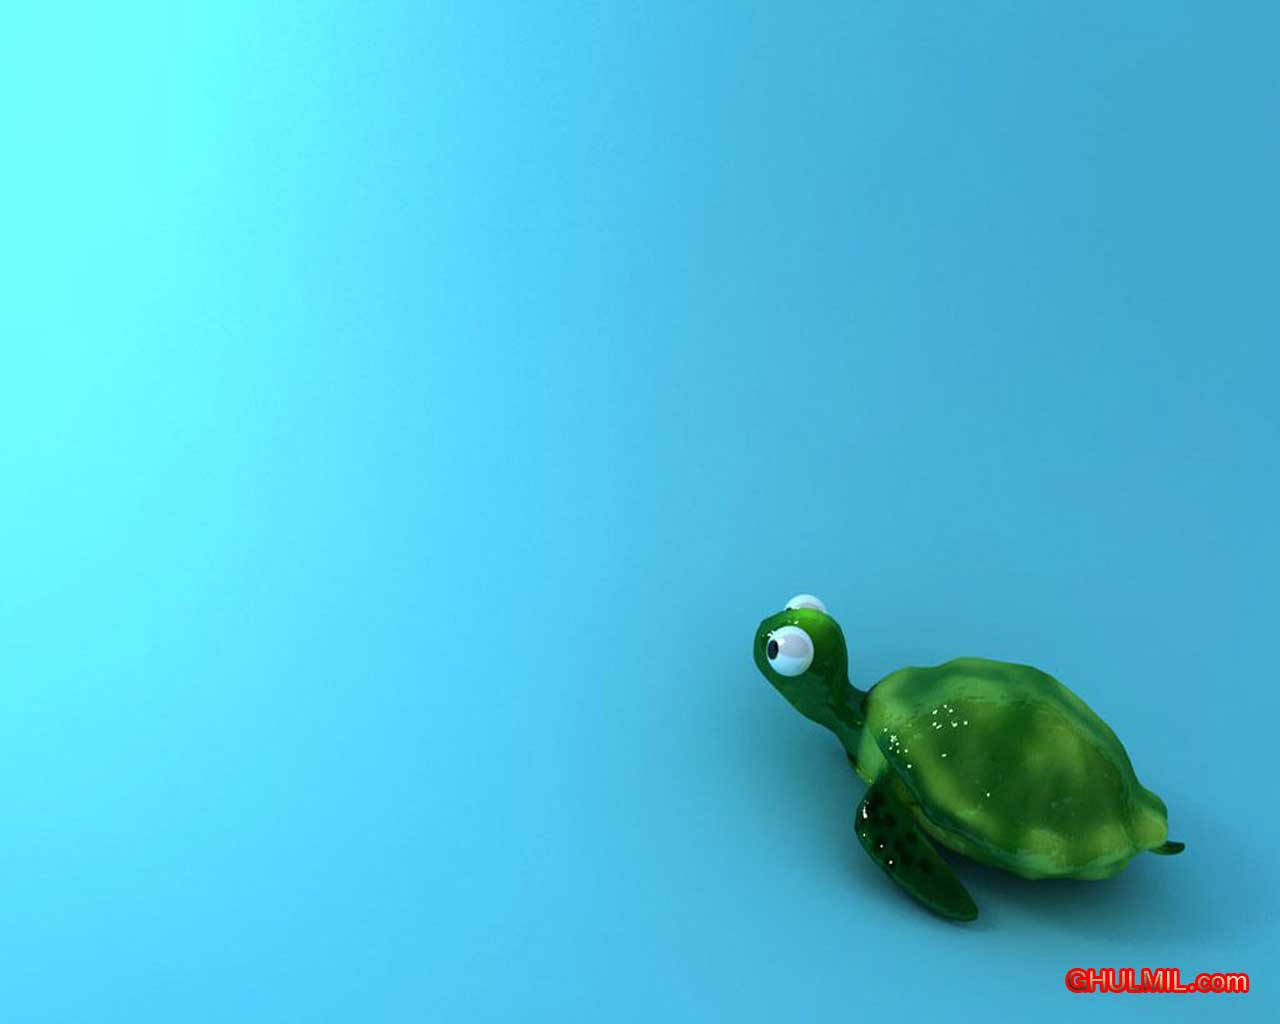 Green Turtle On Blue Surface Cute Computer Wallpaper